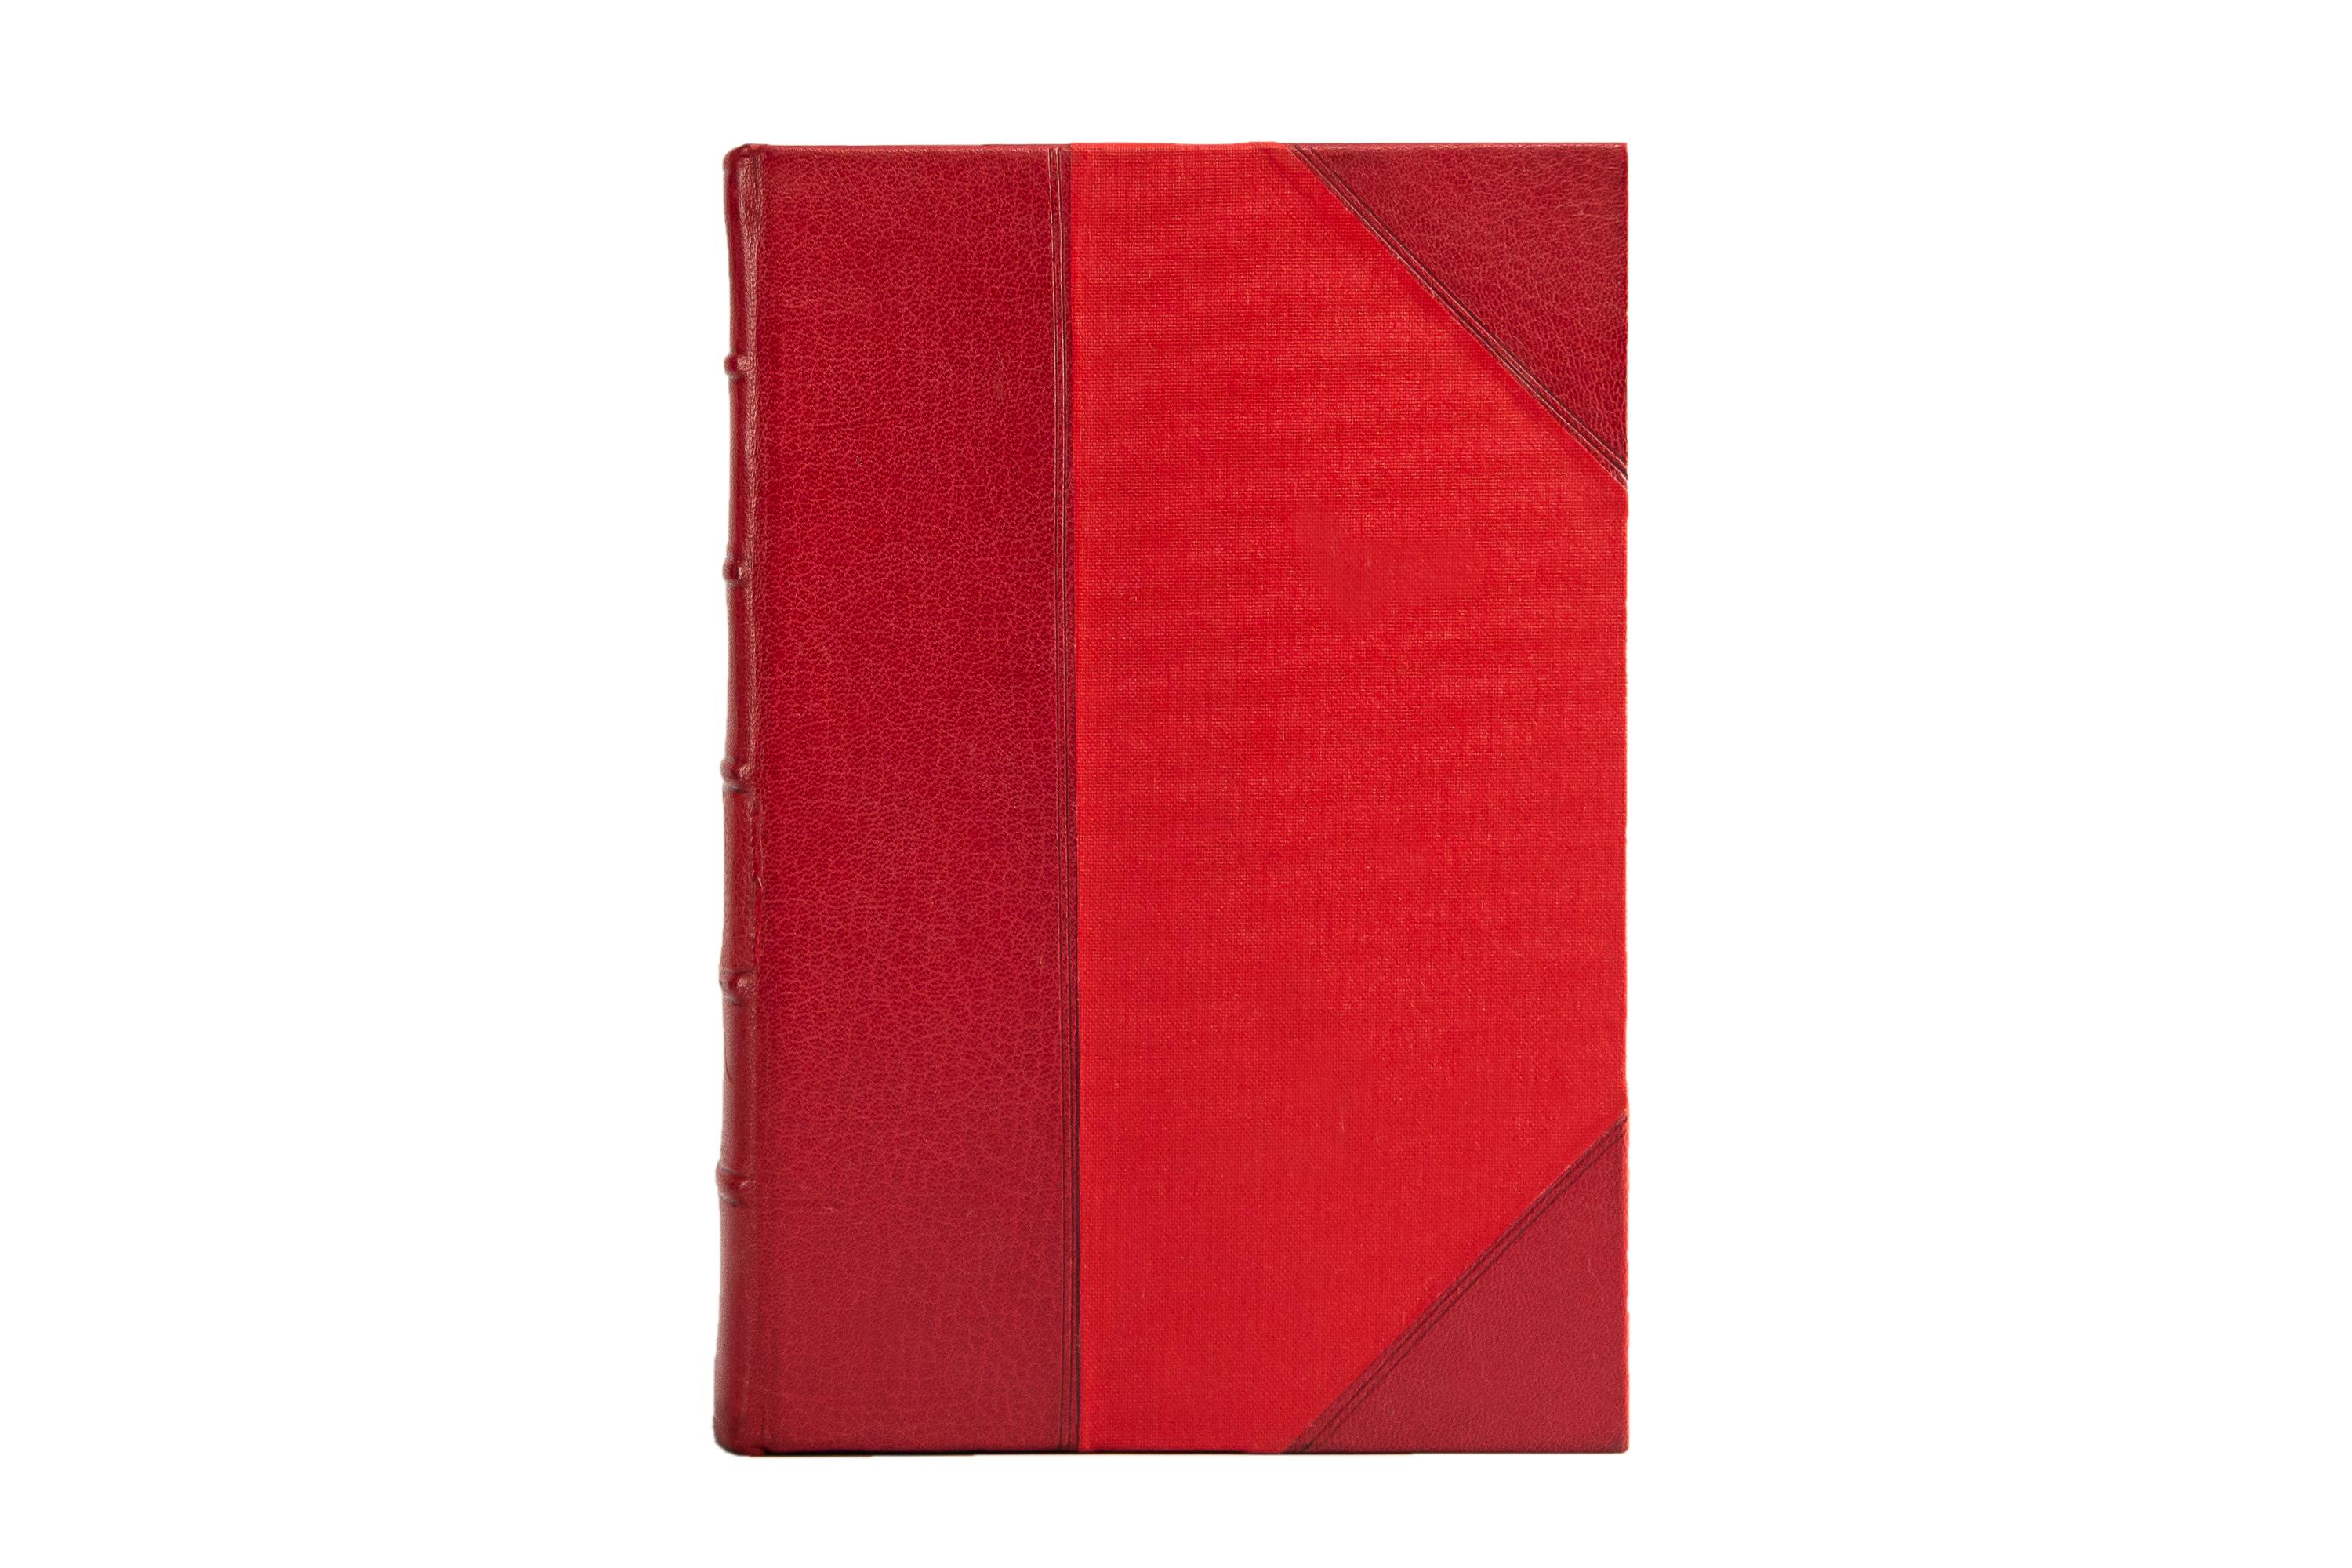 8 Volumes. Life of Winston S. Churchill by Randolph S. Churchill and Martin Gilbert. Various Illustrations throughout. First Edition. Bound in 3/4 red morocco and red linen boards. Raised spine with gilt panels. Top edge gilt. Published in London by